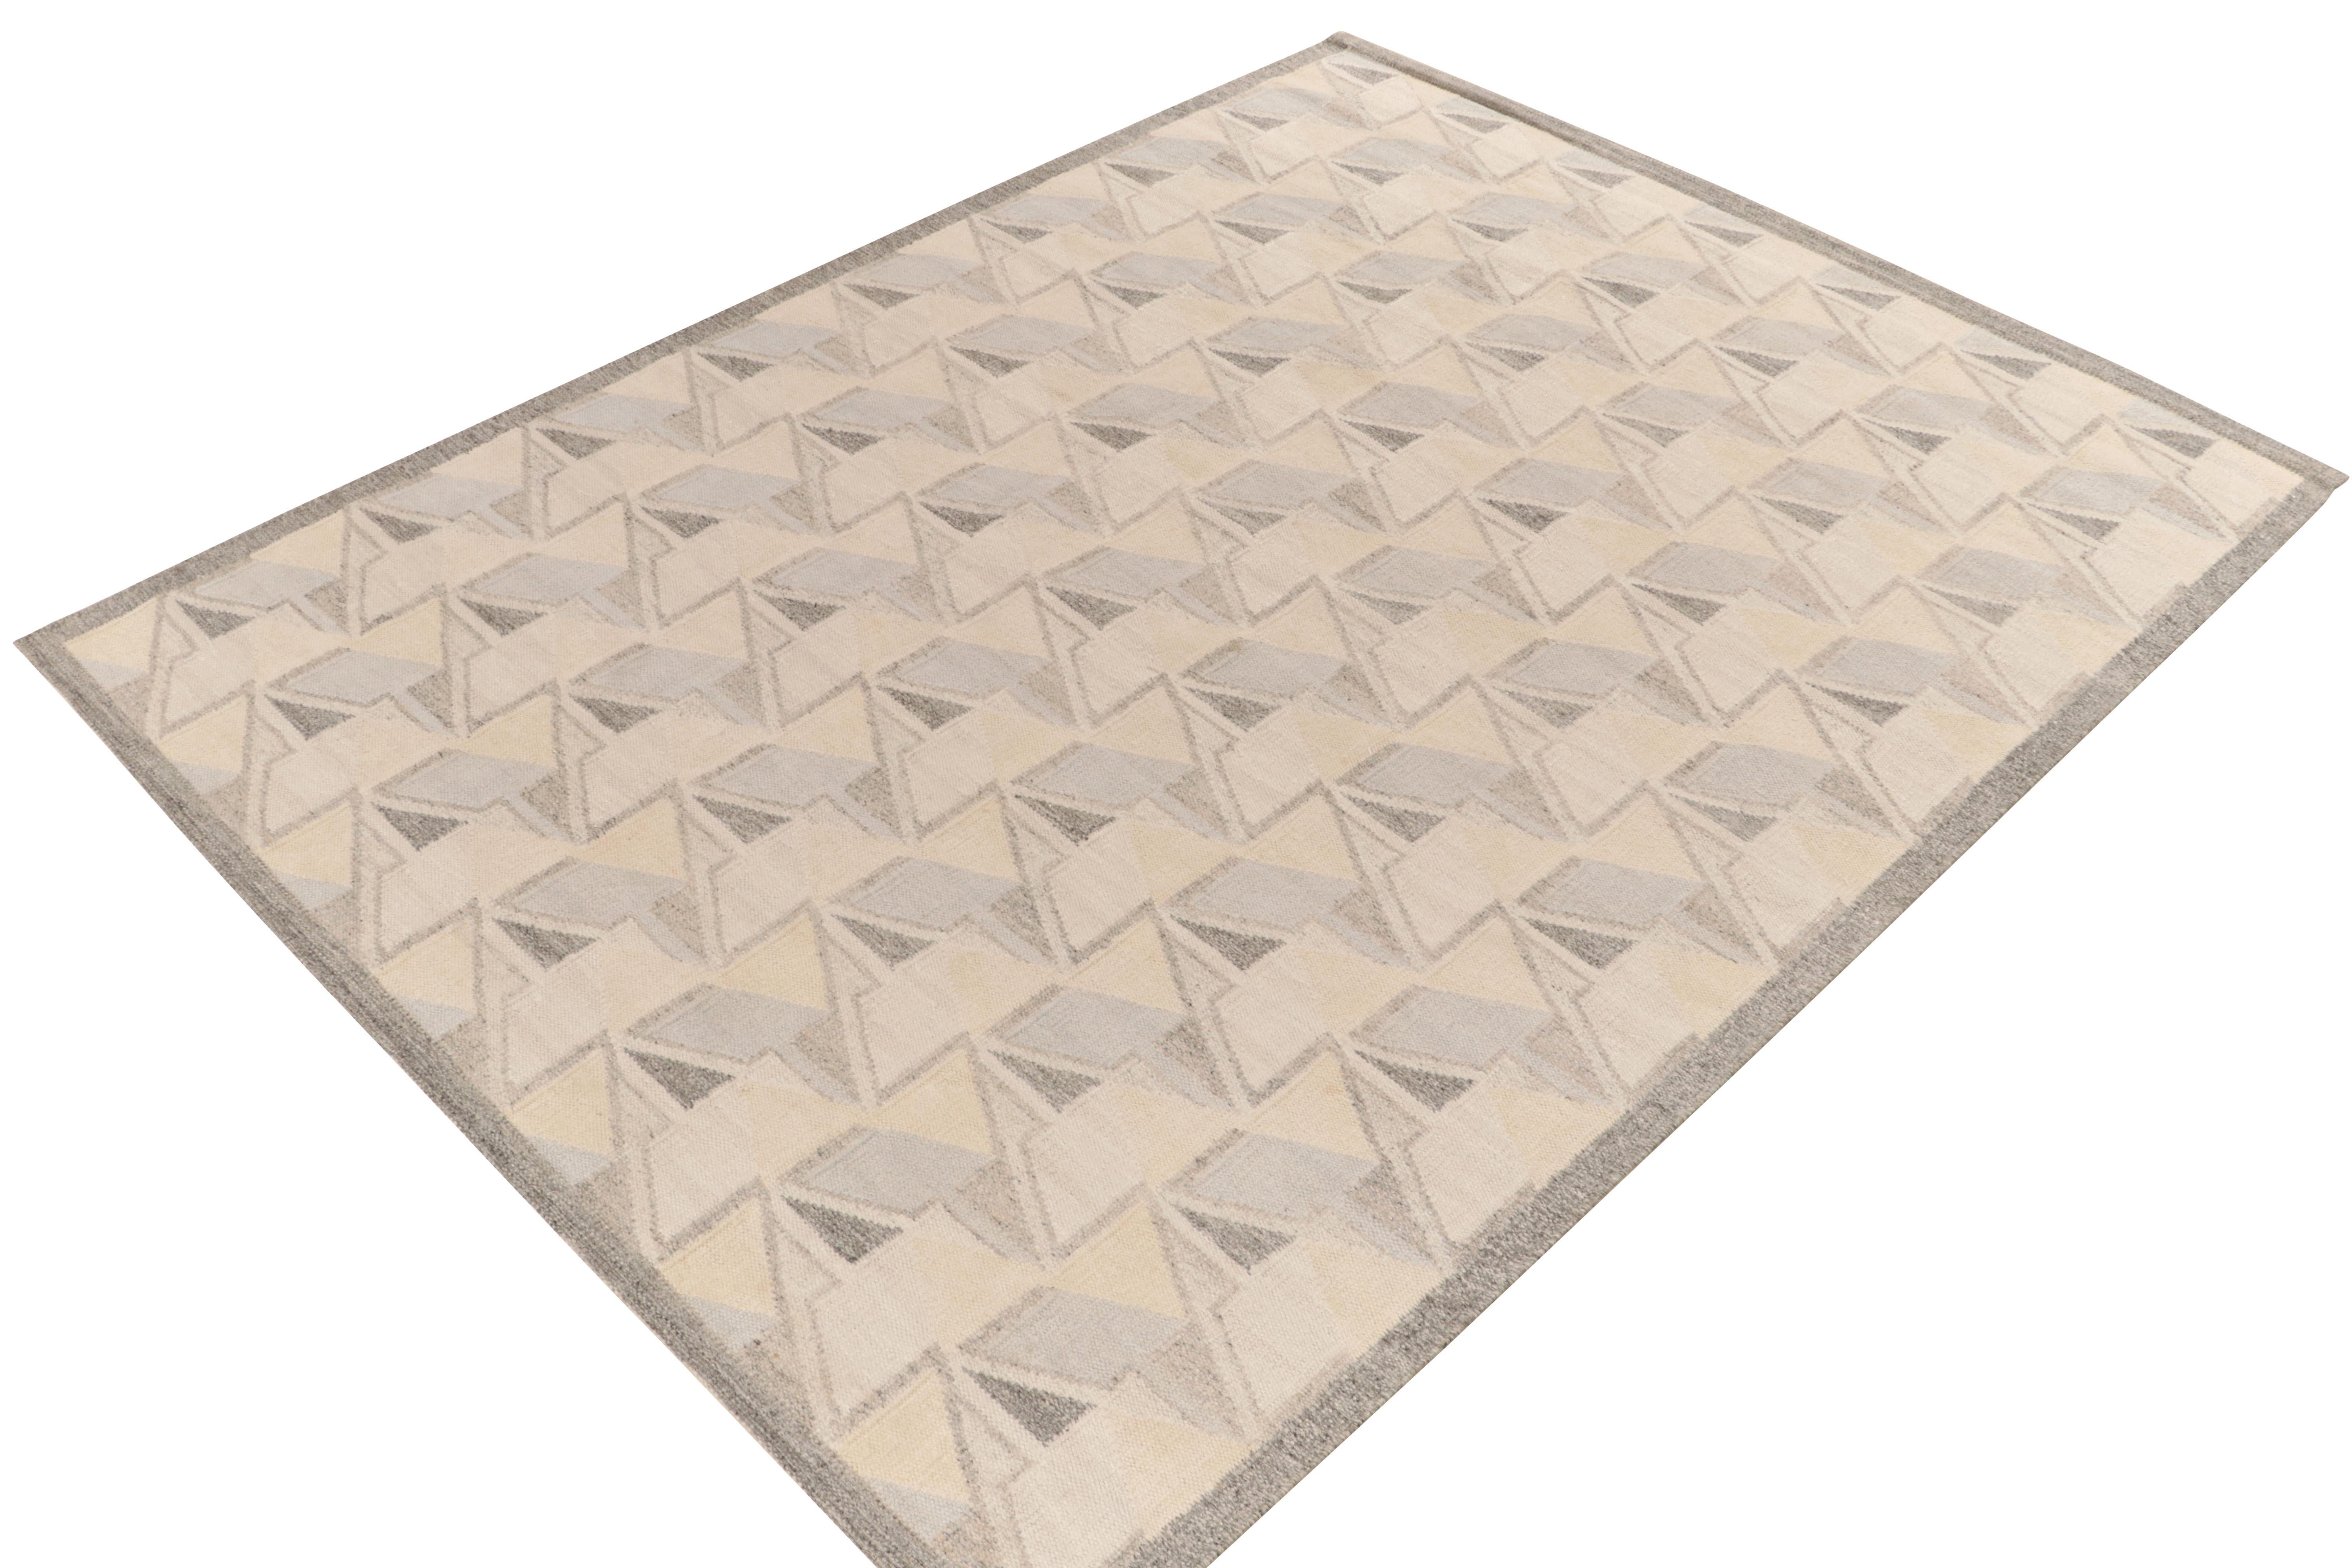 Rug & Kilim’s Scandinavian style kilim from our celebrated flatweave collection. This 8x10 rug enjoys the finesse of Swedish aesthetics with a dextrous geometric pattern casting a 3D impression. The colorway in undyed natural yarns enjoys forgiving